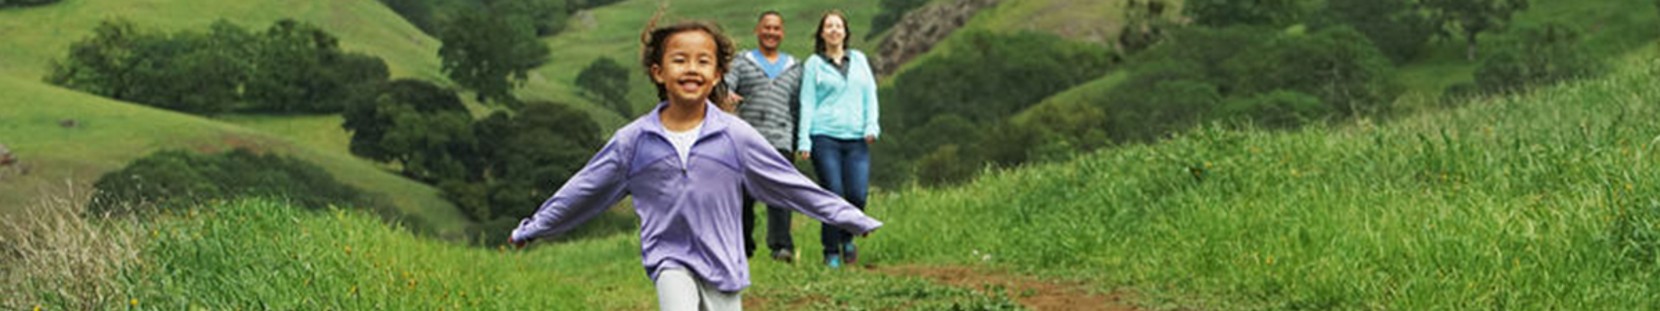 Girl running in a green field with parents walking behind her. 